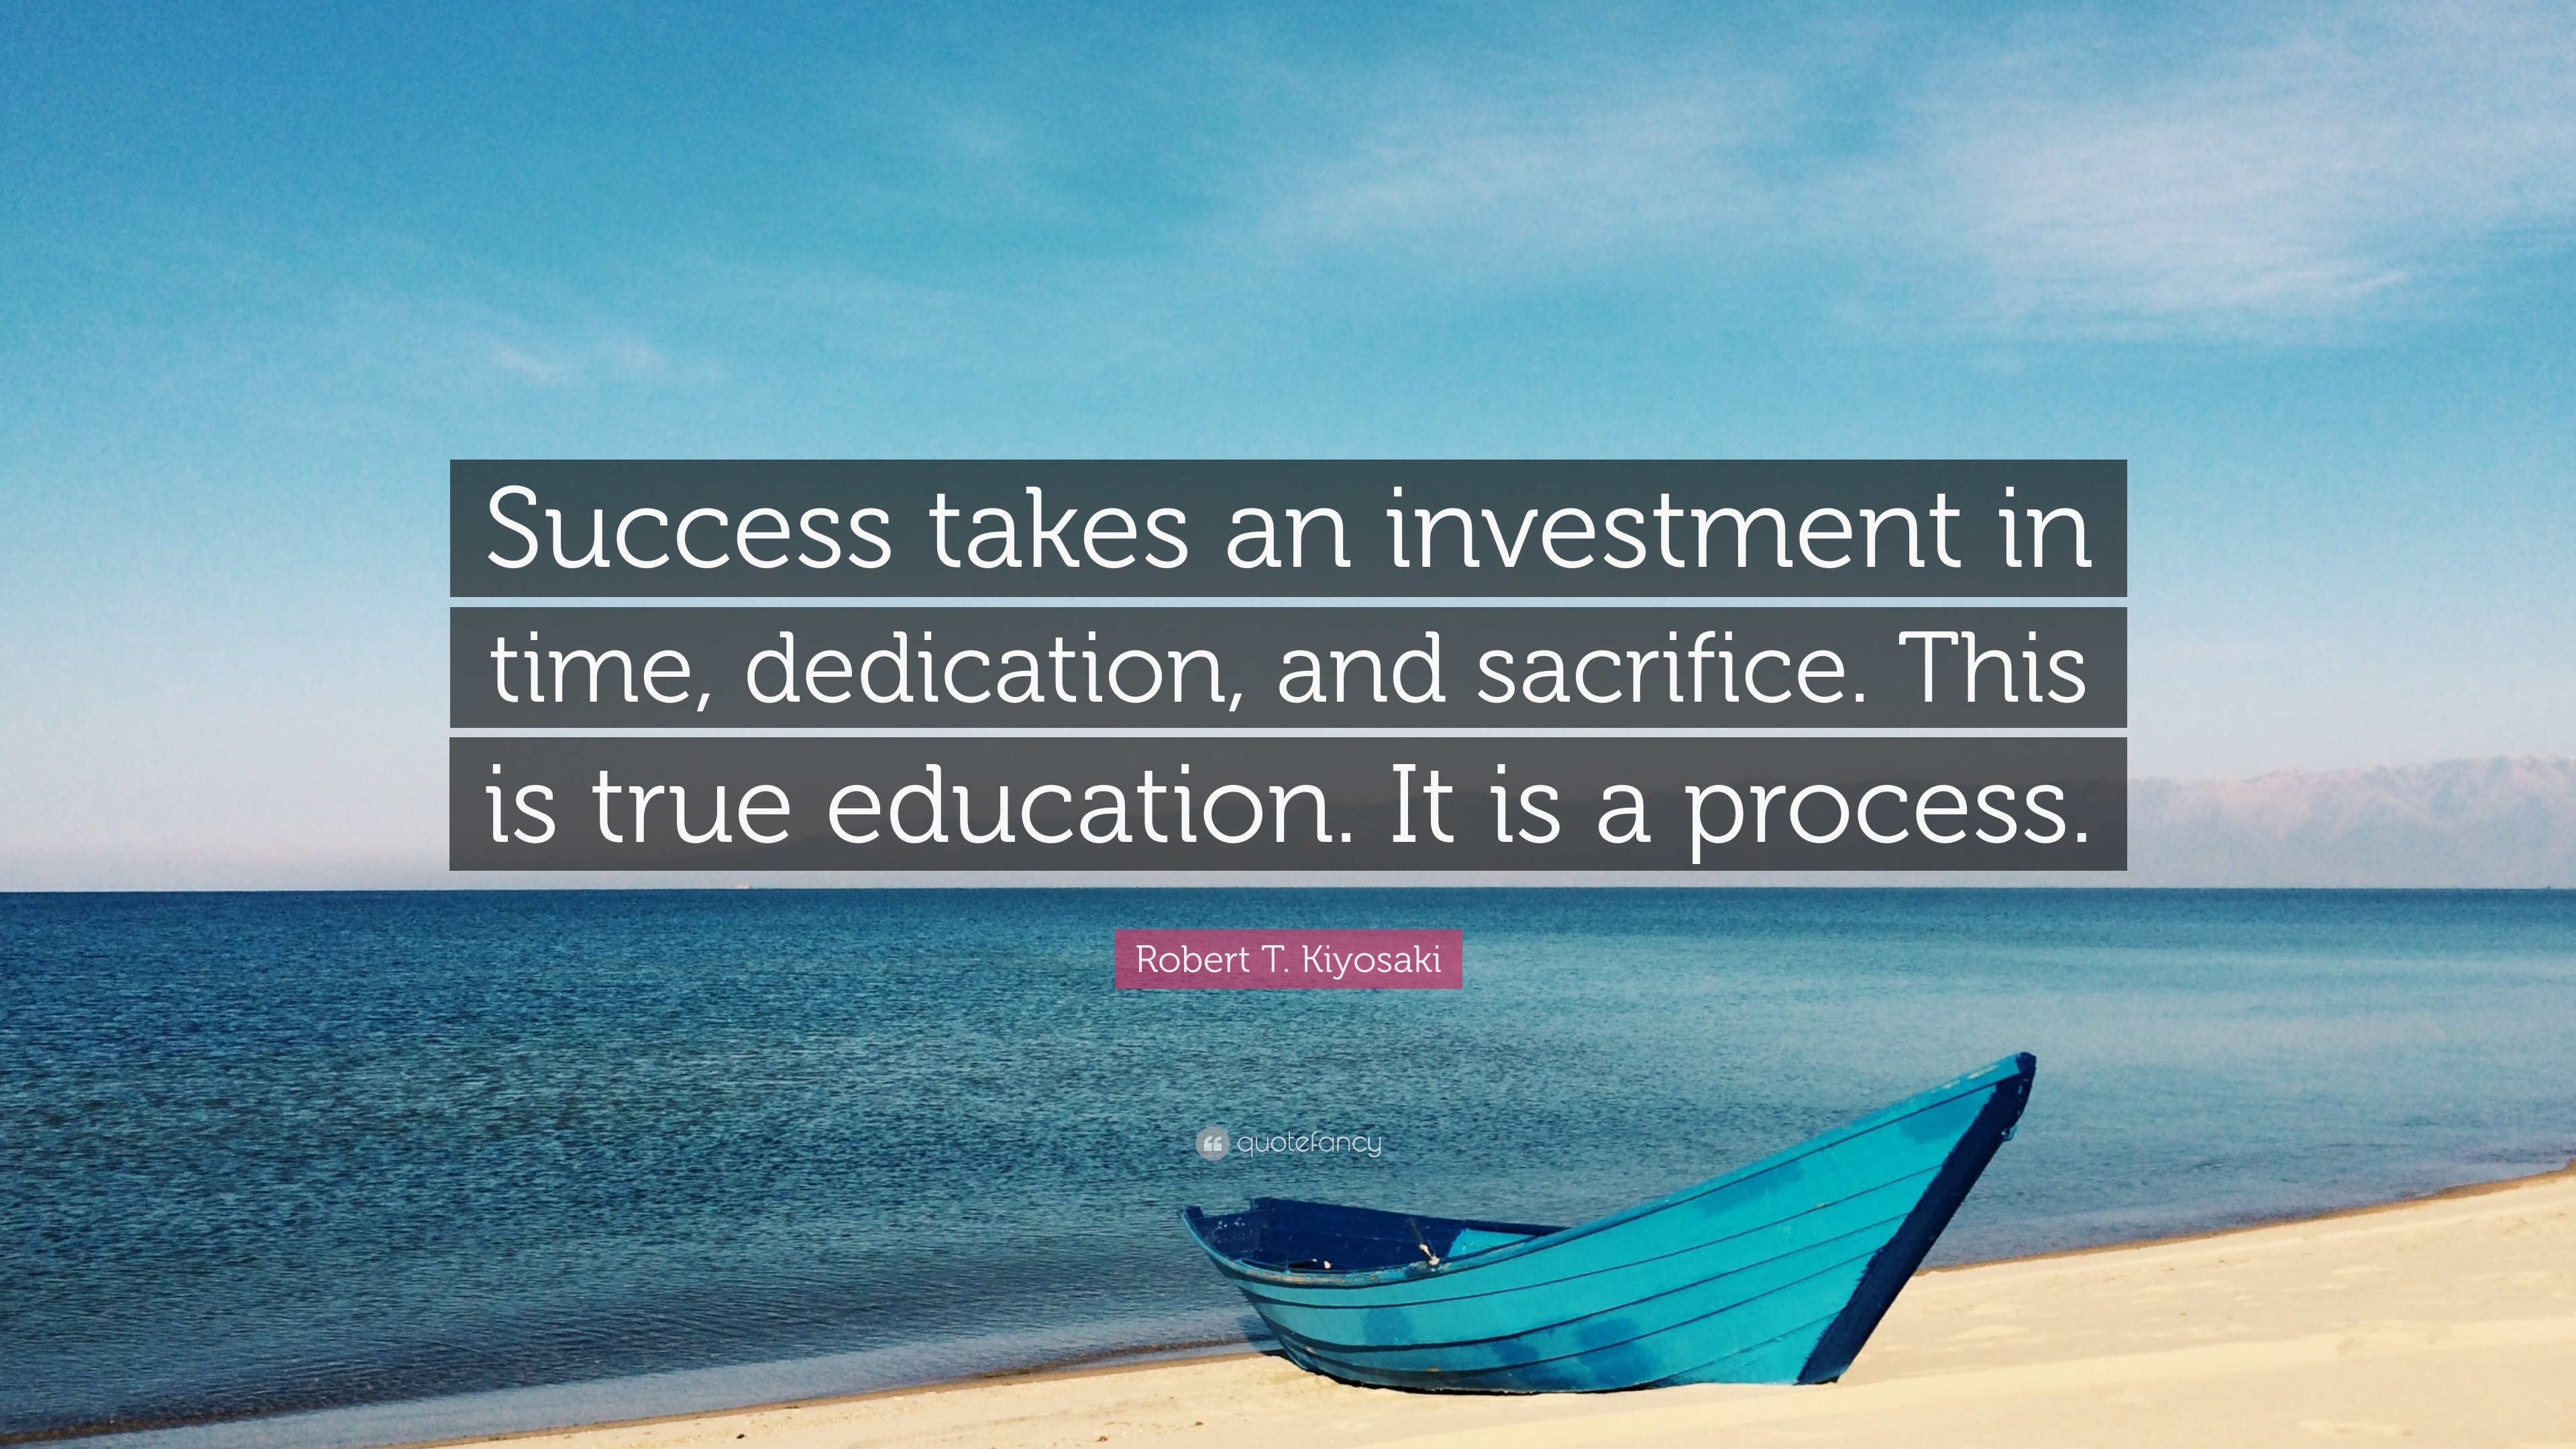 Robert T. Kiyosaki Quote “Success takes an investment in